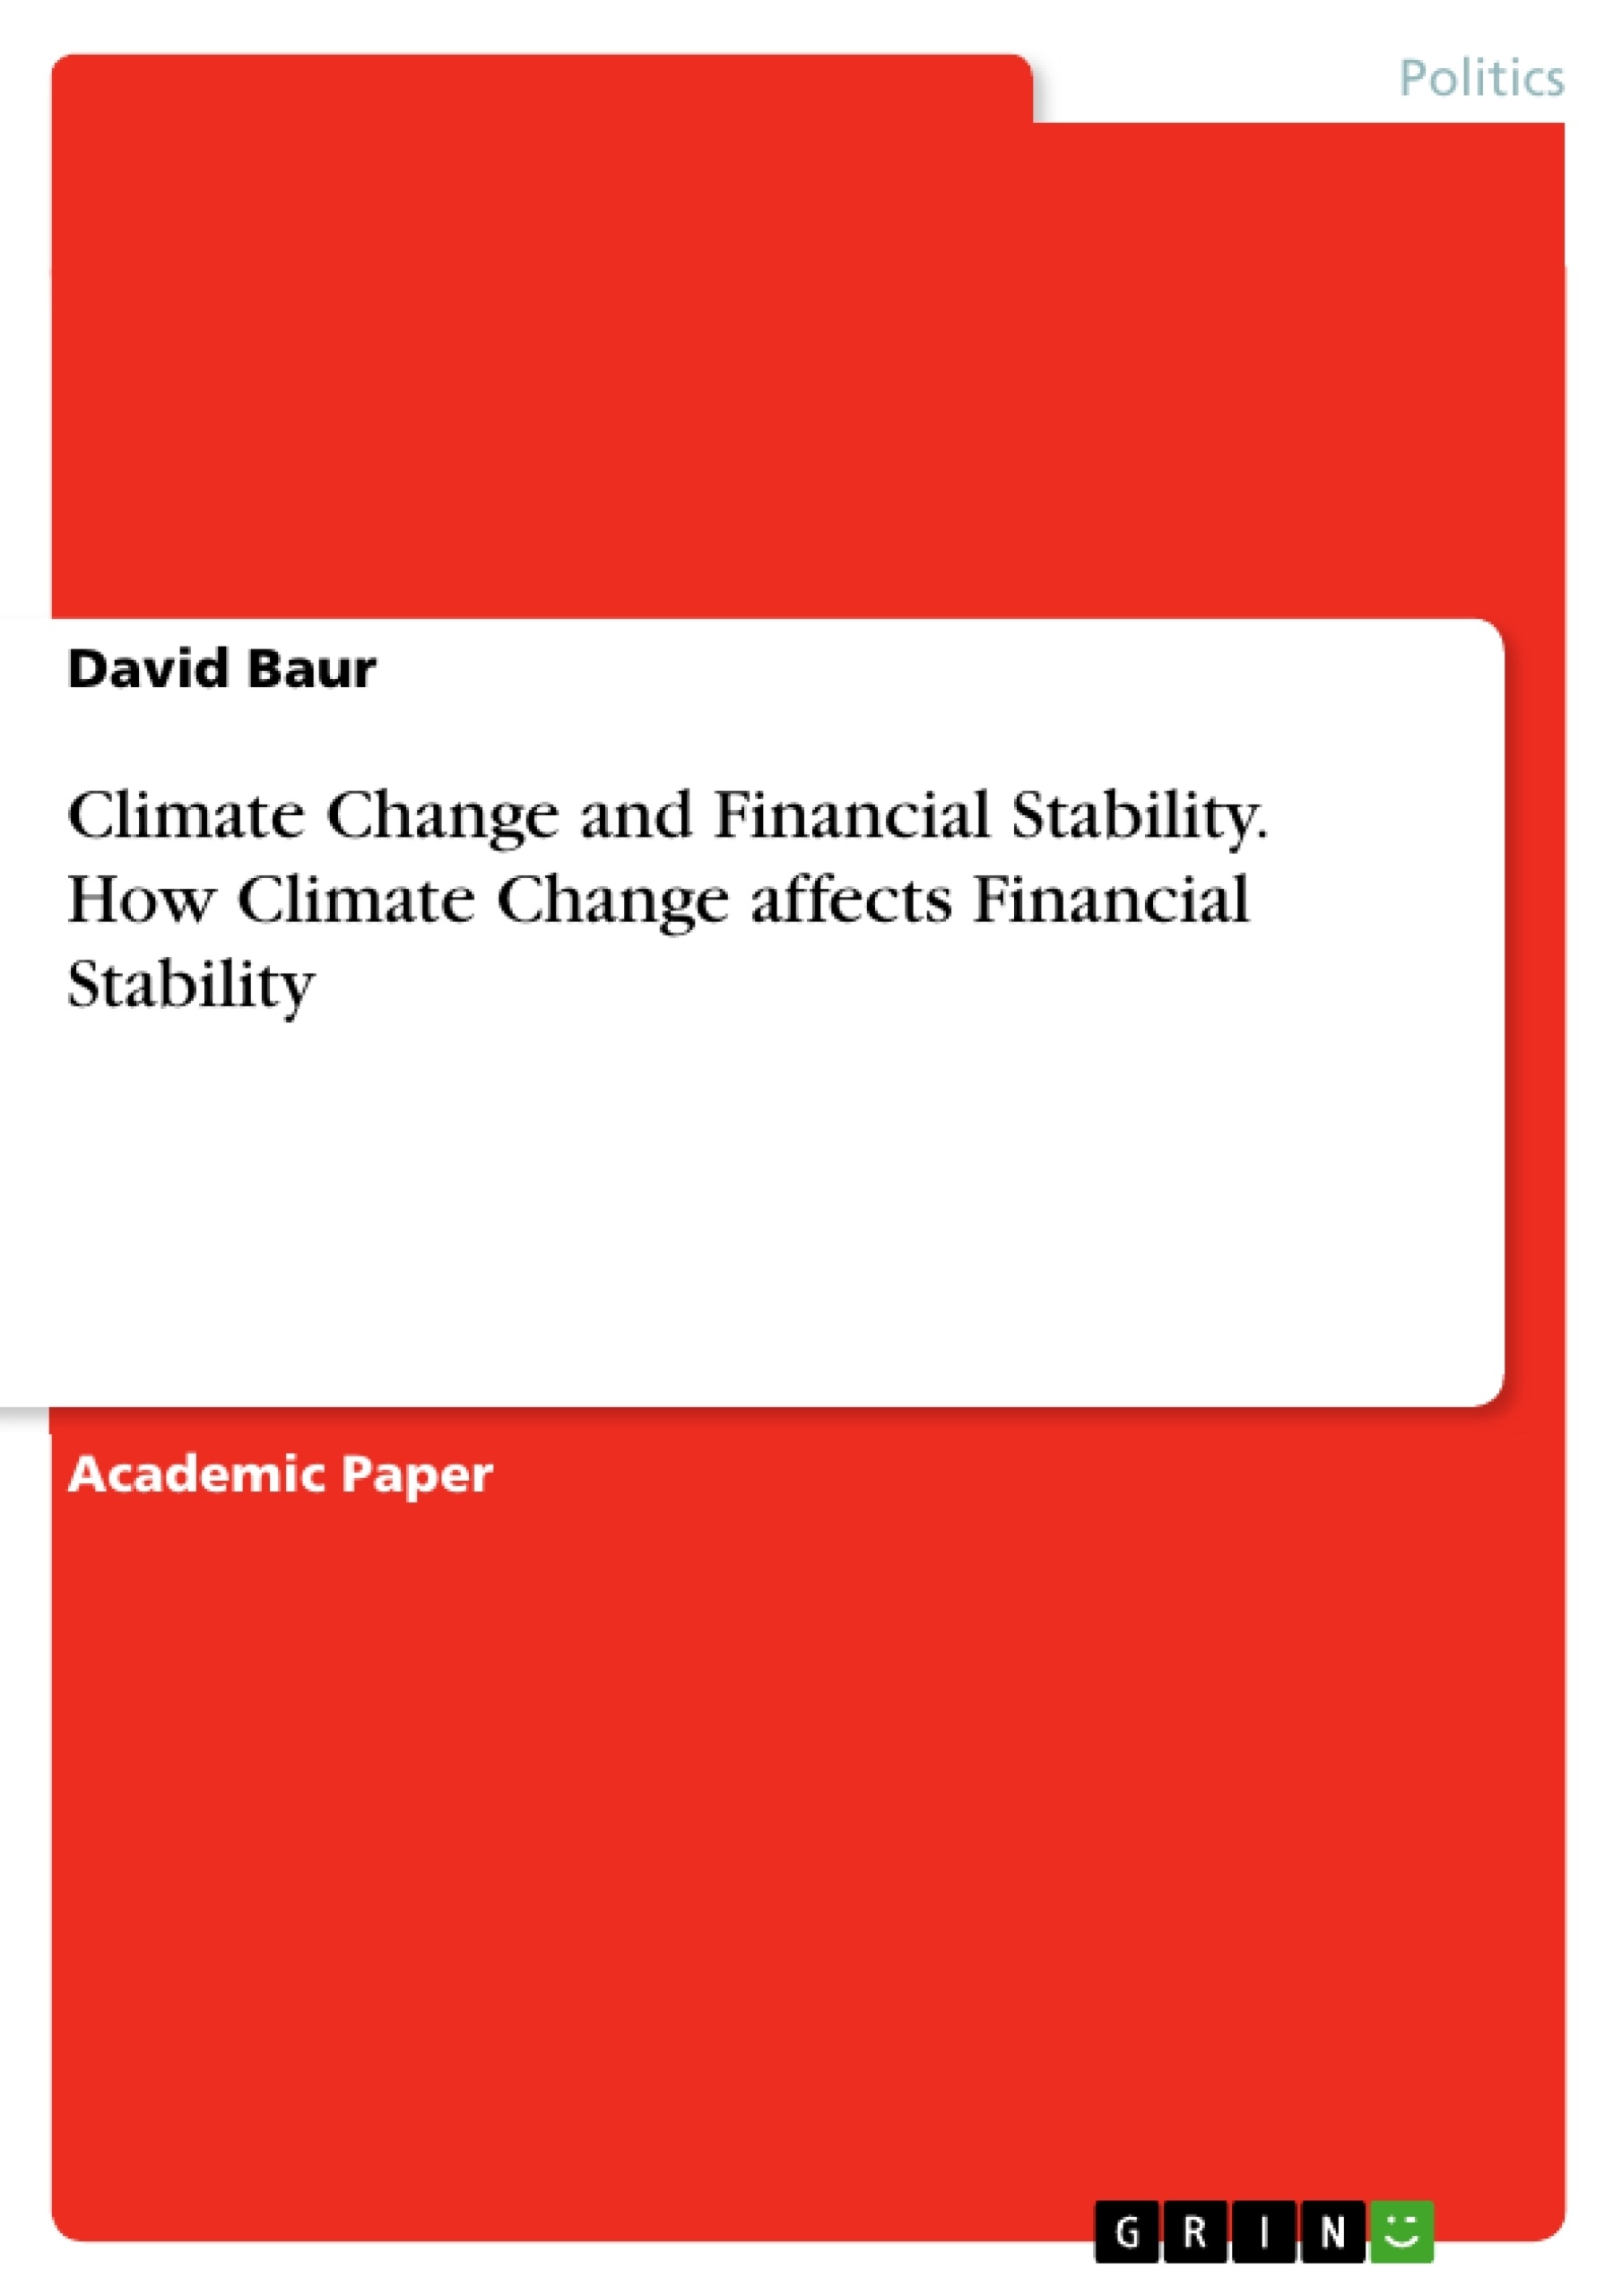 Title: Climate Change and Financial Stability. How Climate Change affects Financial Stability